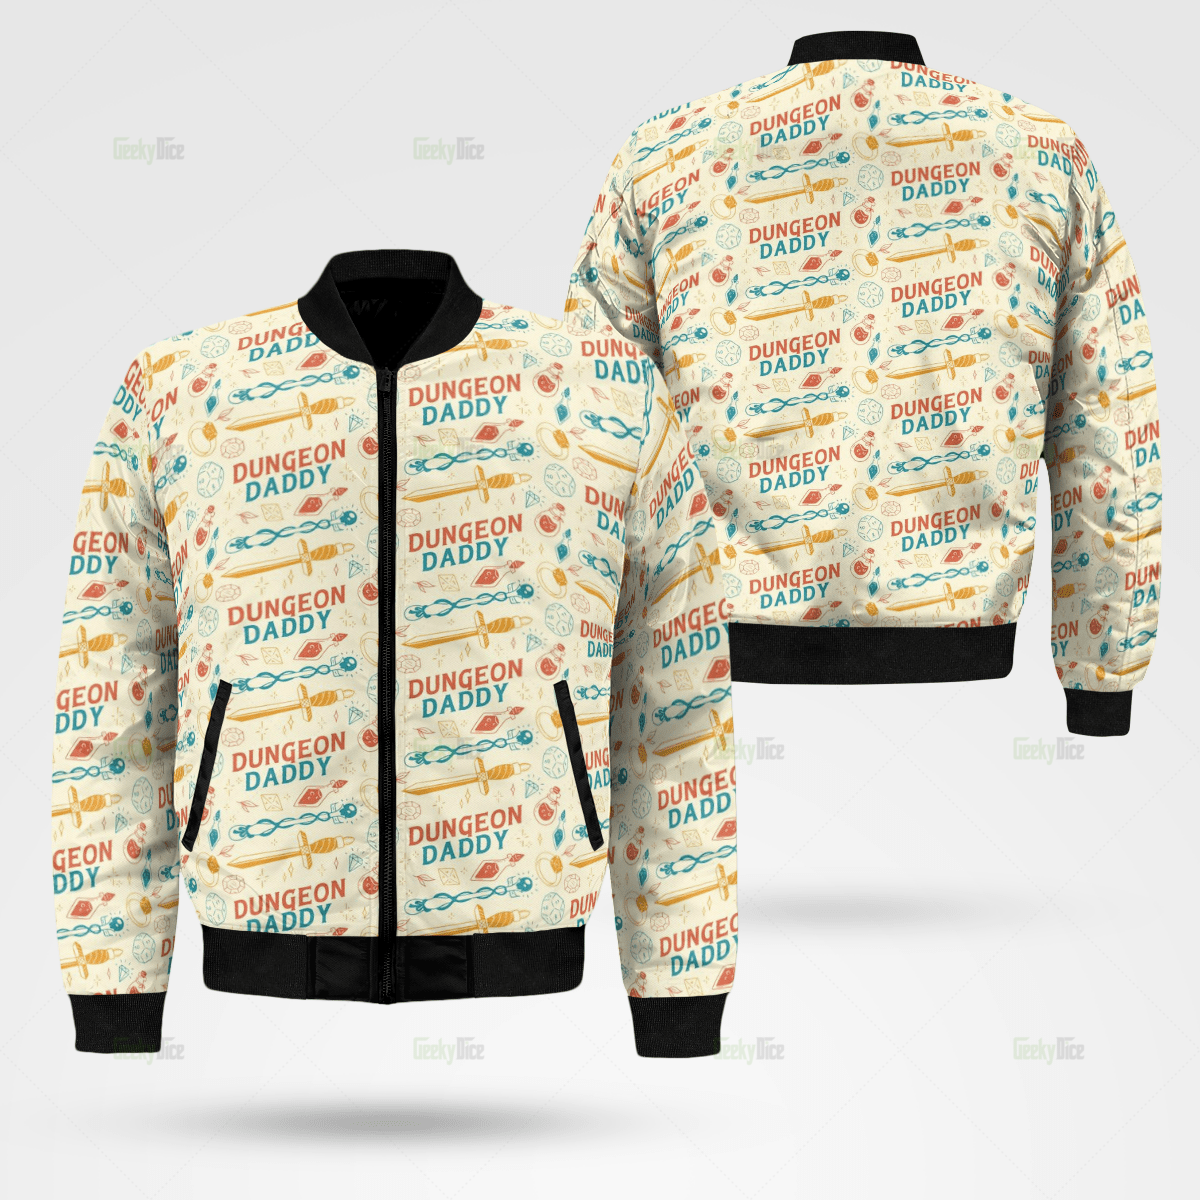 Dungeon Daddy bomber jacket